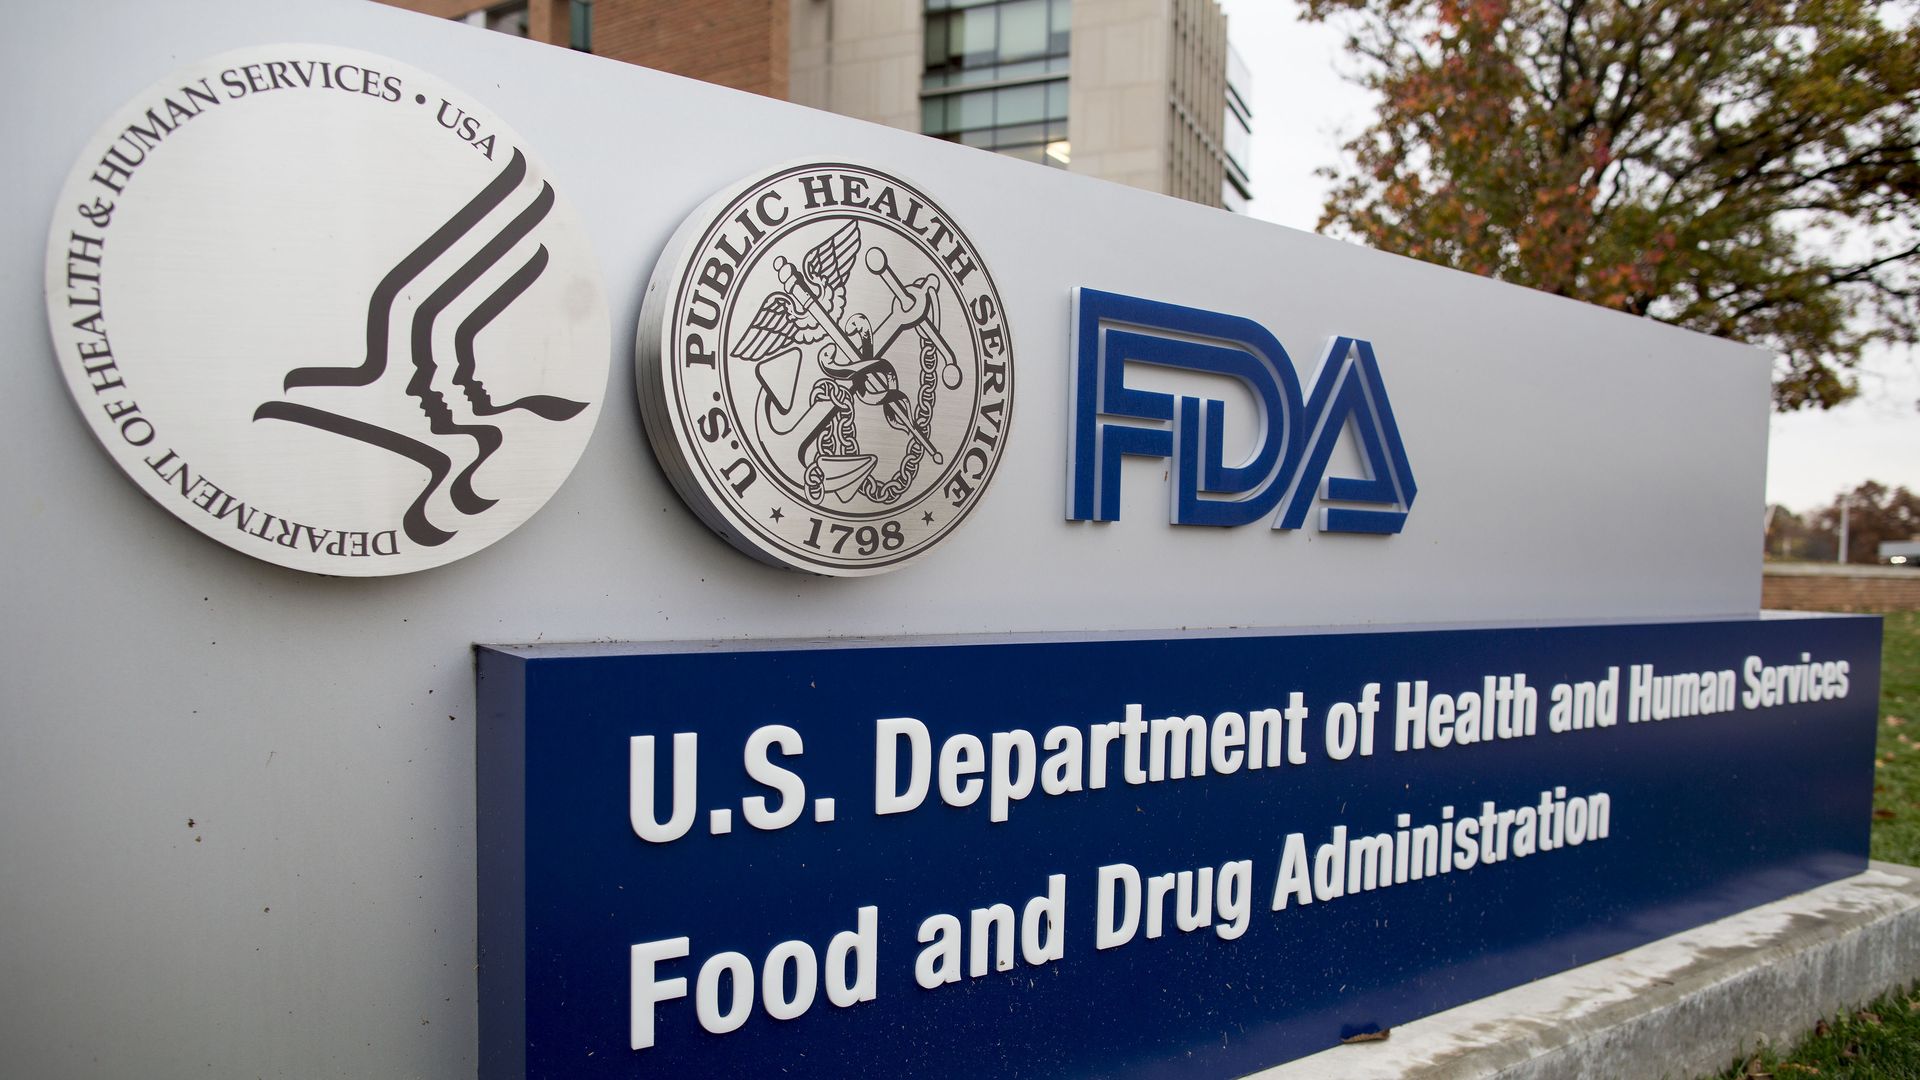 In this image, a sign displays the FDA and HHS logos